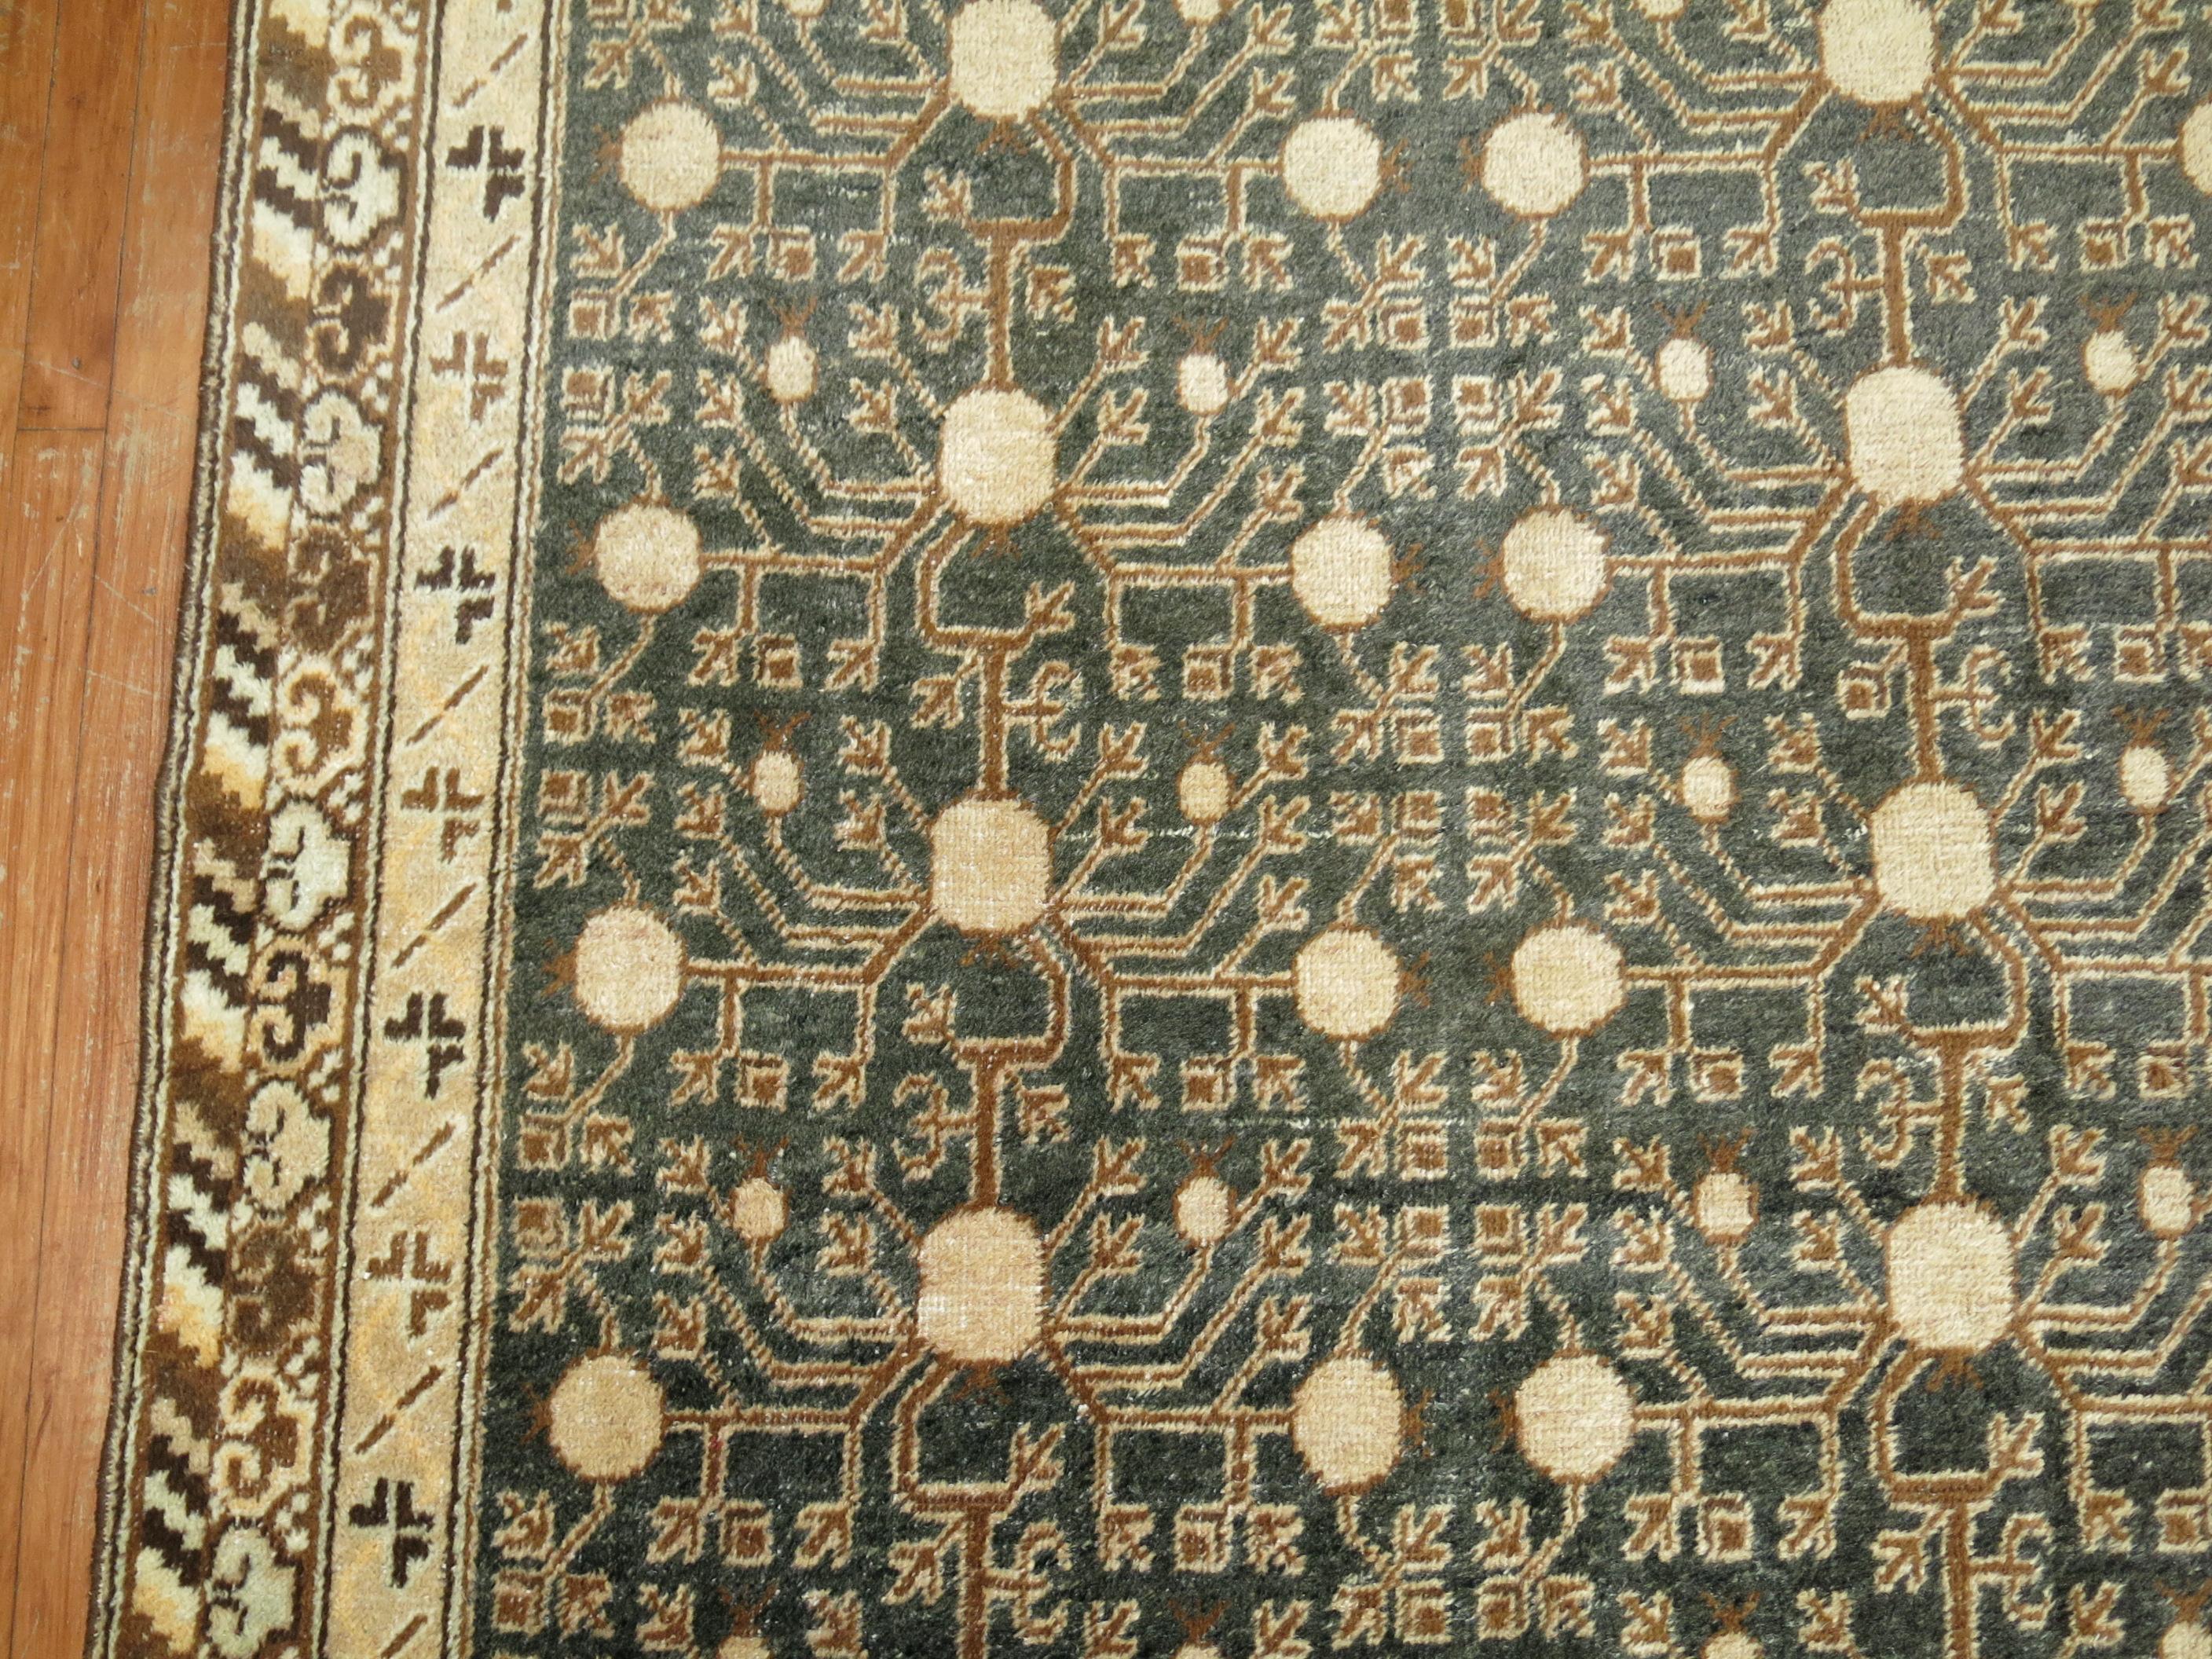 Early 20th Century Khotan Rug in Olive Green and Brown